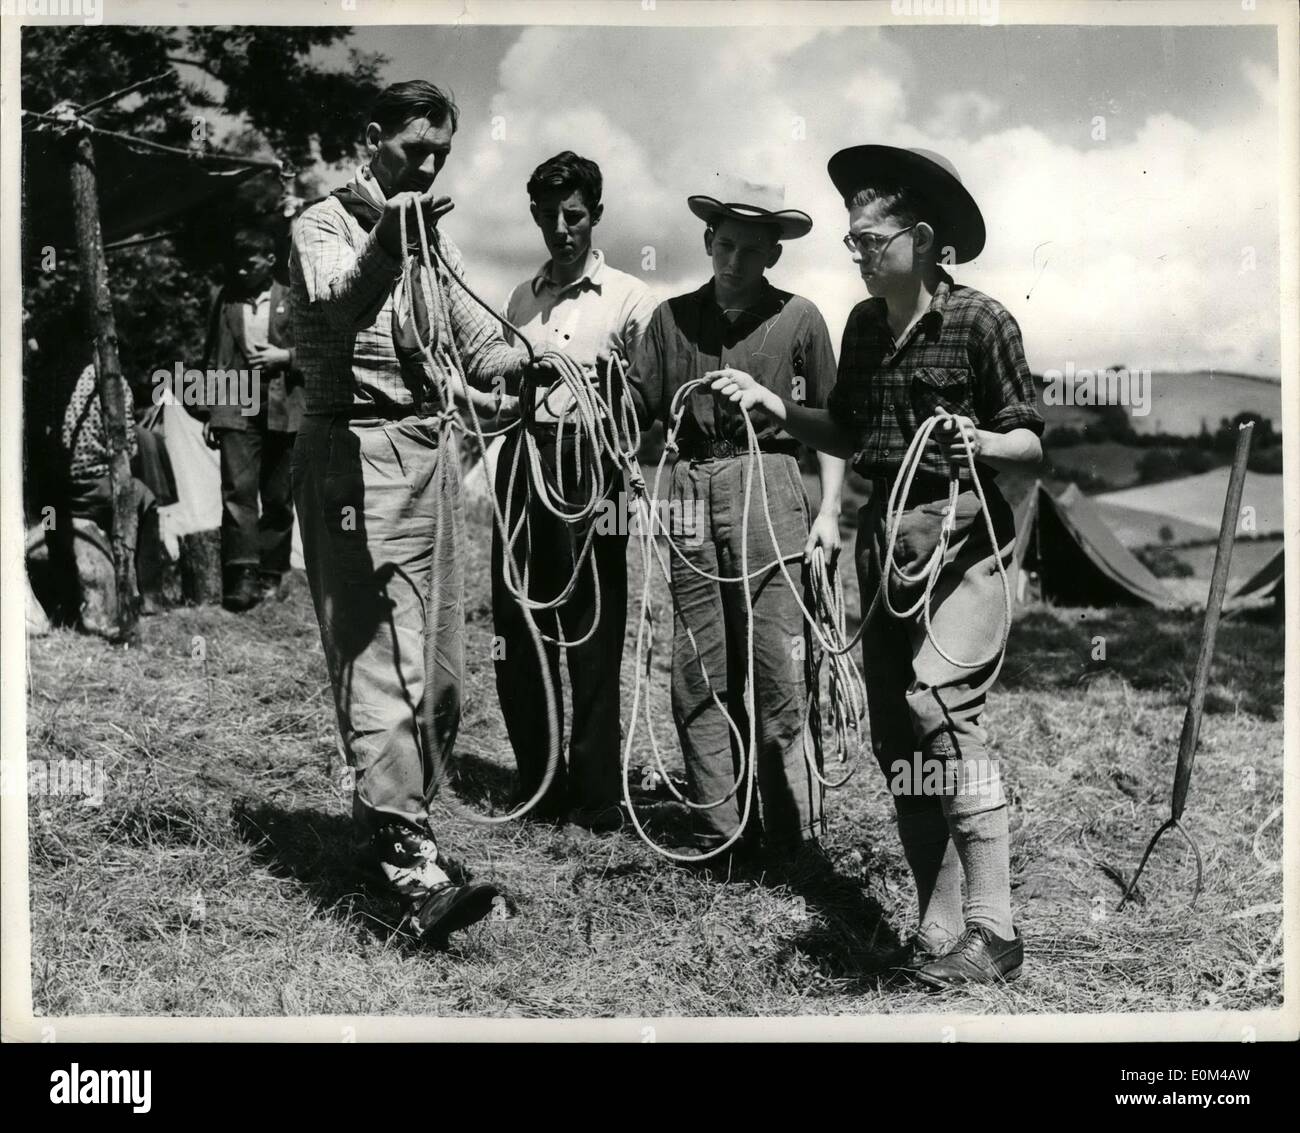 Jul. 24, 1953 - 24-7-53 The young cowboys of Dartmoor. Lasso lessons. Ex-South American cowpuncher Ross Salmon is holding a two weeks course for would-be cowboys on his School for Cowboysat Longdown, near Exster, where he hopes to start a cattle range. He plans to rear cattle in real ranching style on 25,000 of Dartmoor's lonely acres in an effort to put to use some of the wastelands of Britain. To do it he is teaching the boys to ride cowboy style and to do everything that a real Western Cowboy has to do which is rather different to the Cowboys of the Sereen Stock Photo